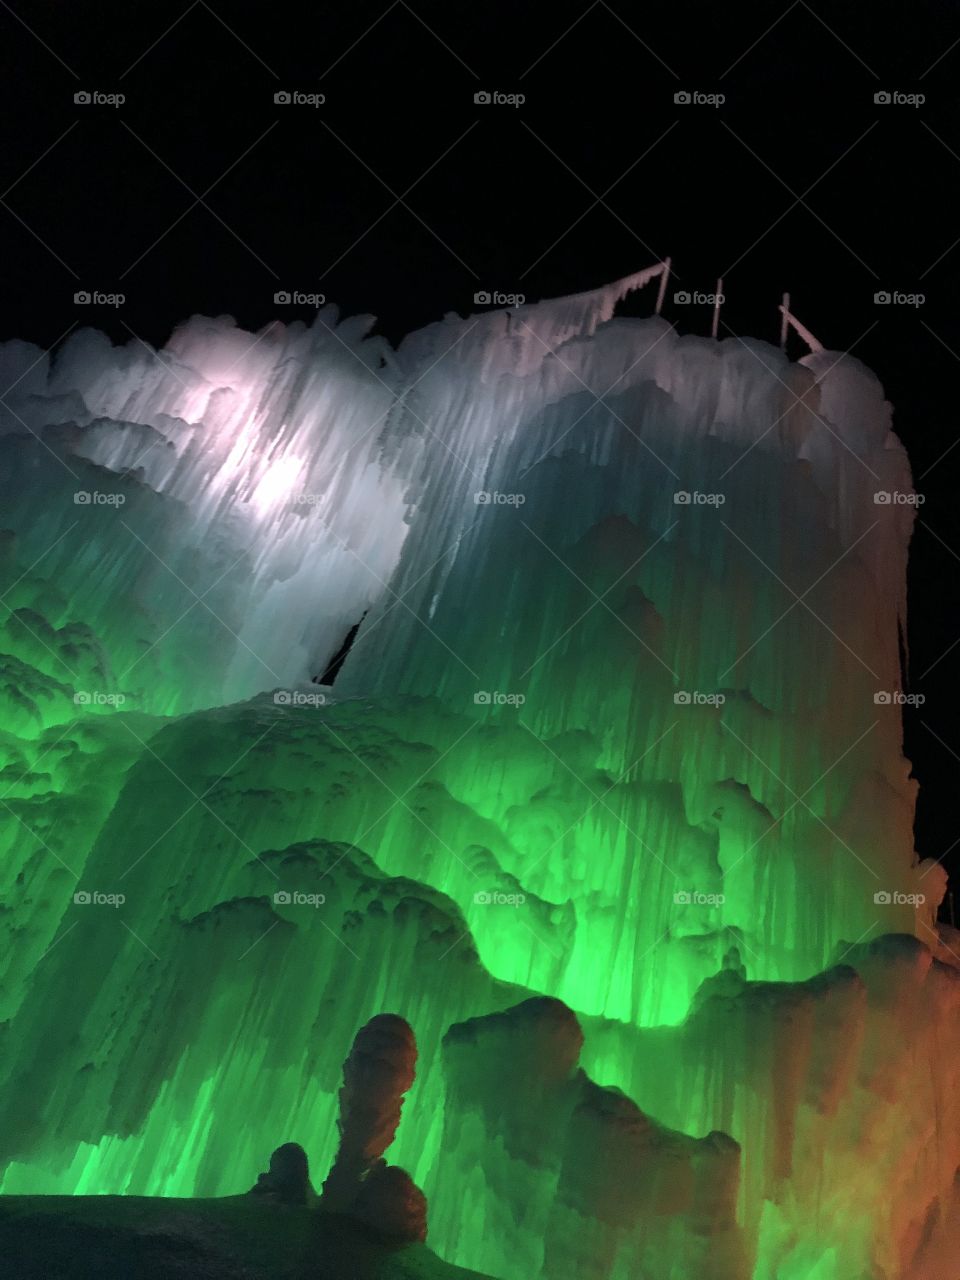 A dark mysterious ice tower with a green glow. Who knows what hides within?!